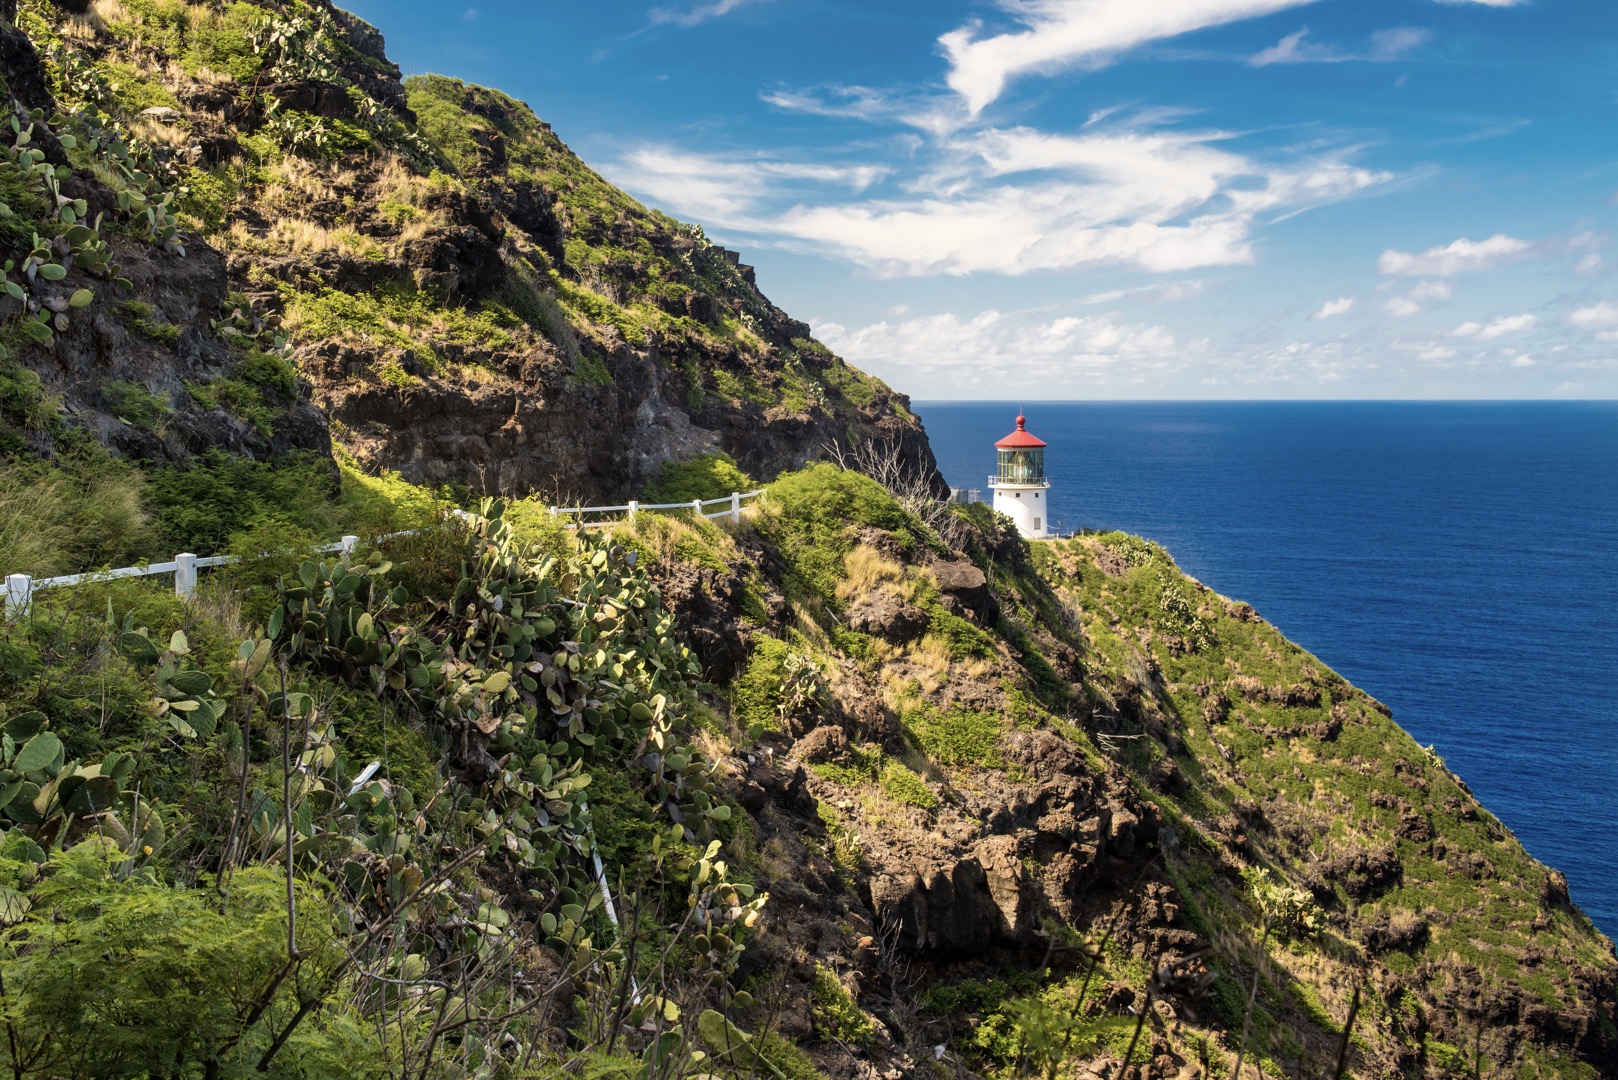 Makapuu Lighthouse - An Important Historical Site